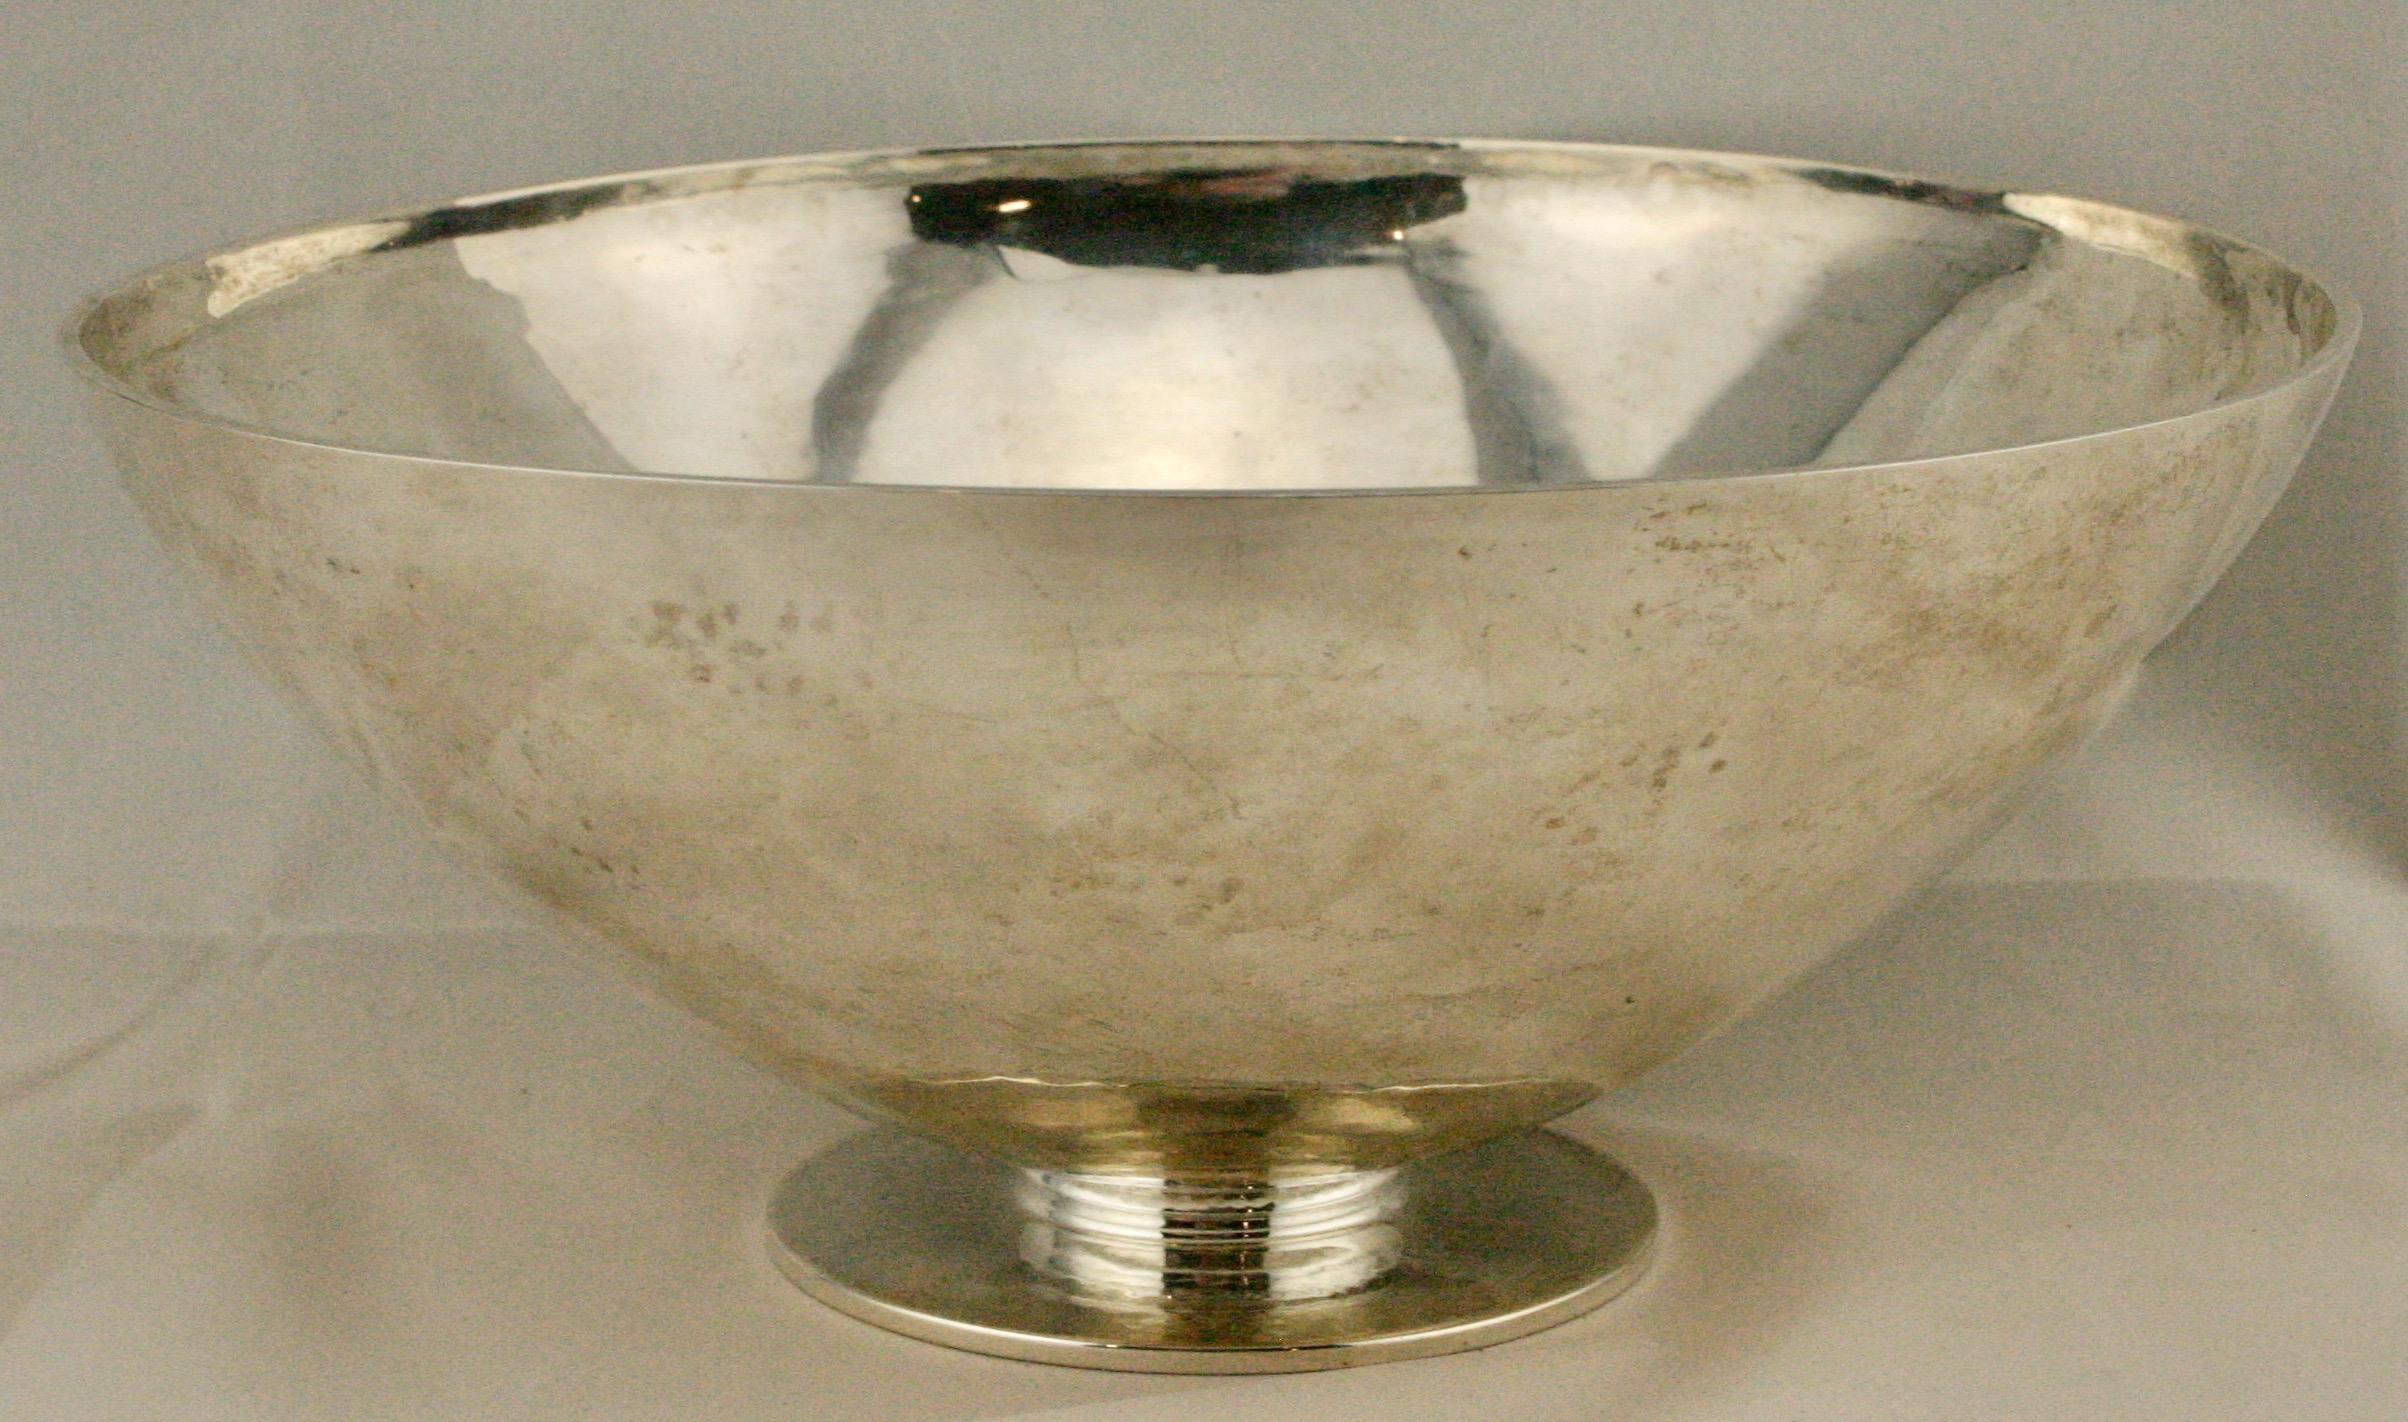 Georg Jensen hand hammered Art Deco footed sterling bowl designed by Georg Jensen himself. Beautiful hand hammered surface. The bowl has 1925-1931 marks, and designer 